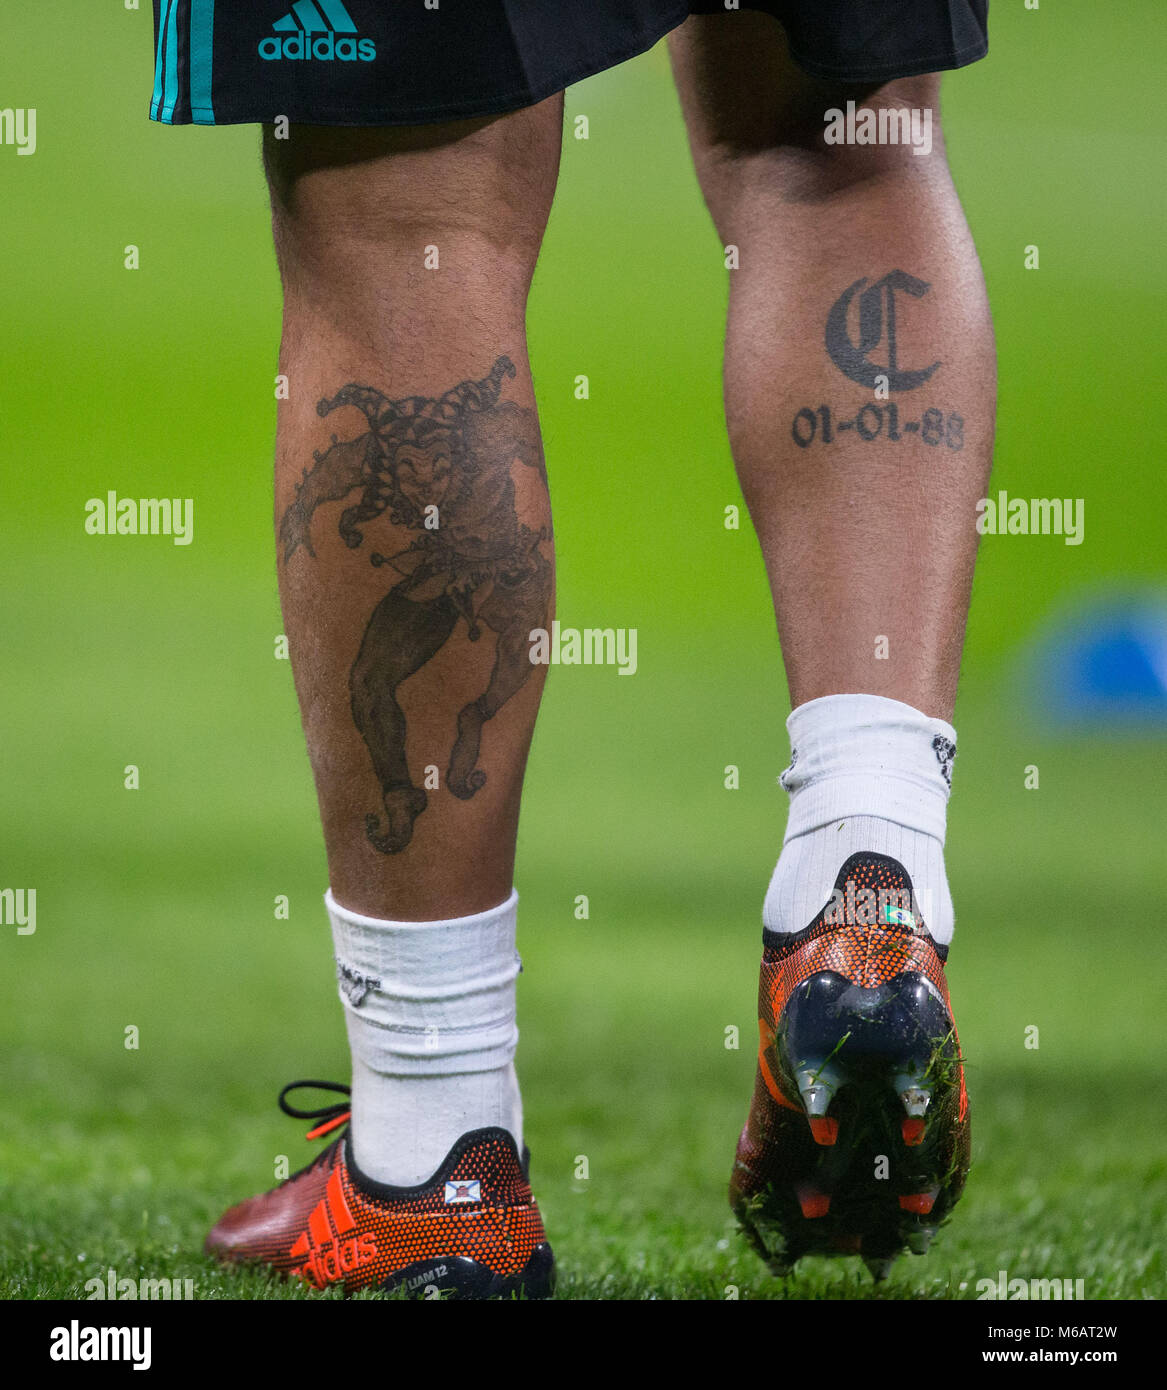 Top 7 Superstar Footballer Lionel Messi Tattoo Design with Meaning   EntertainmentMesh